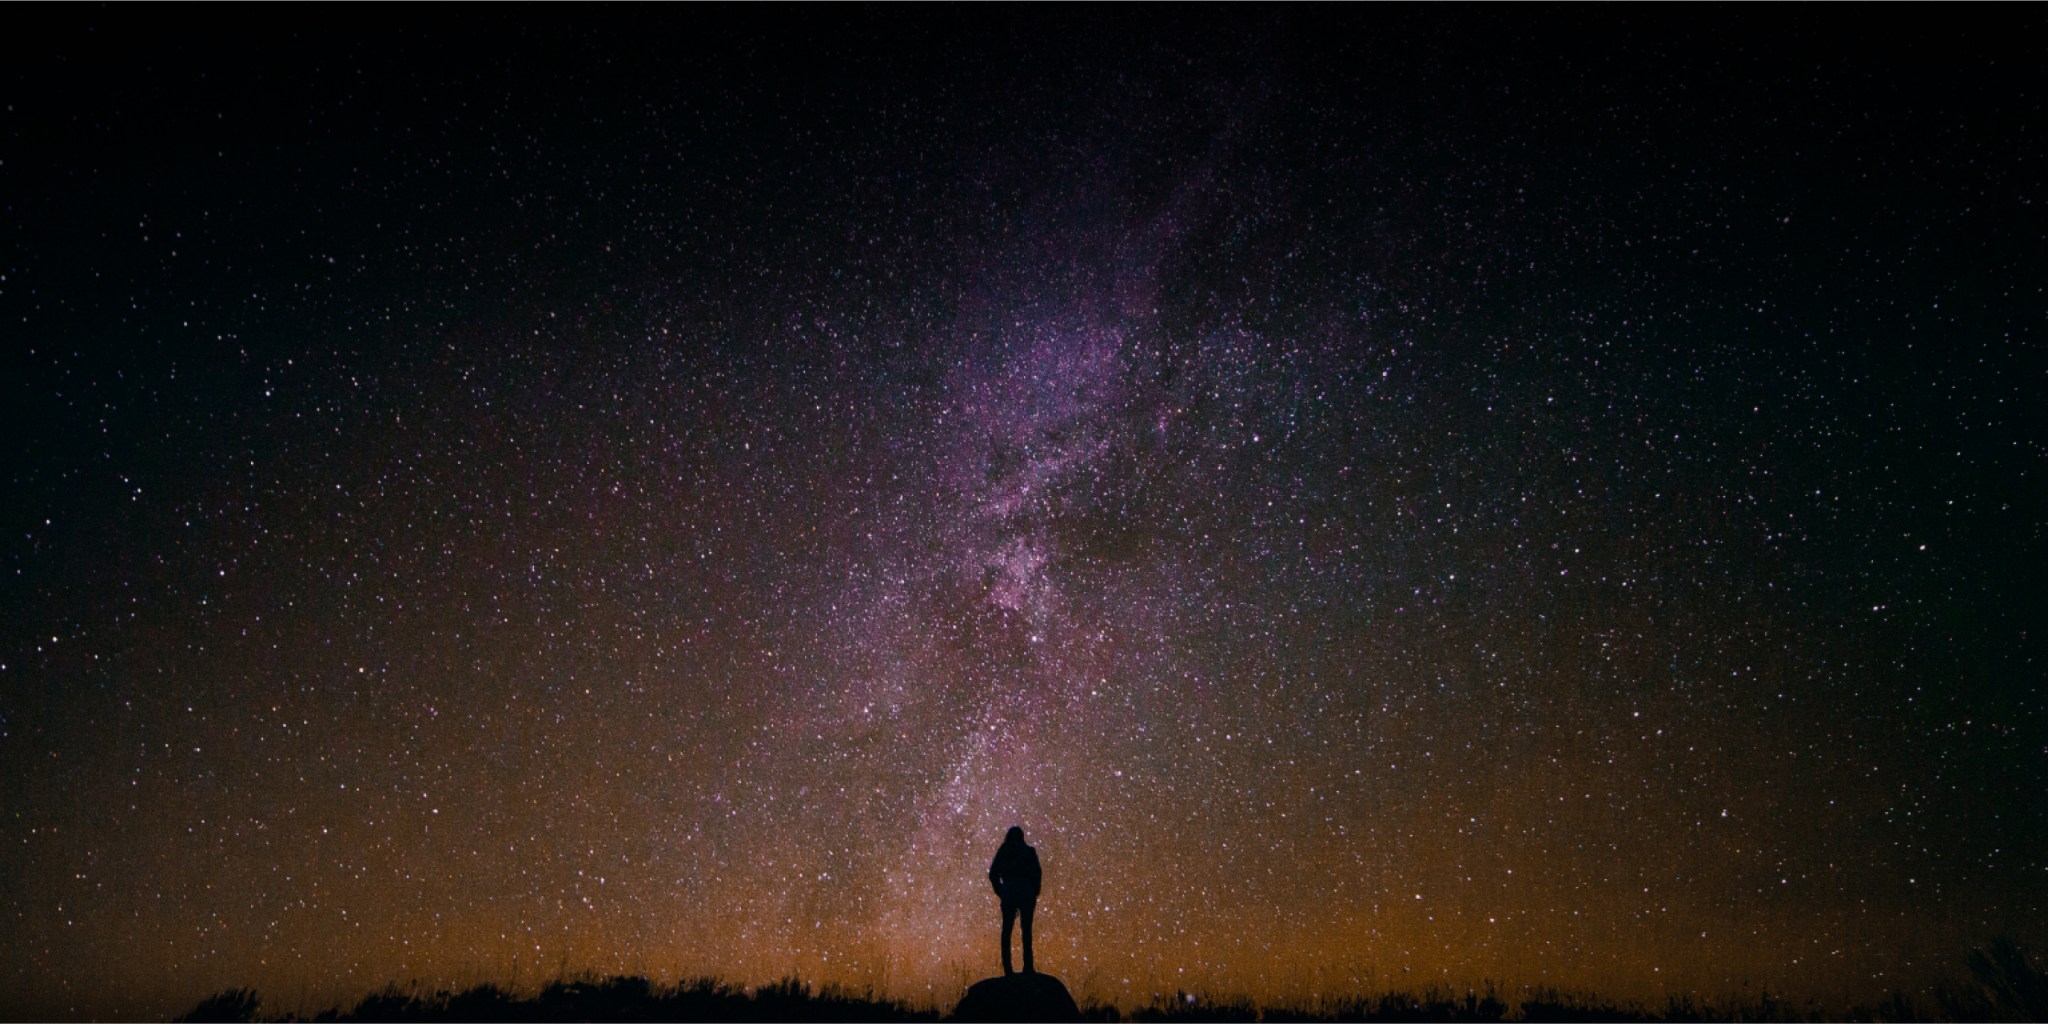 Silhouette of person beneath a starry sky